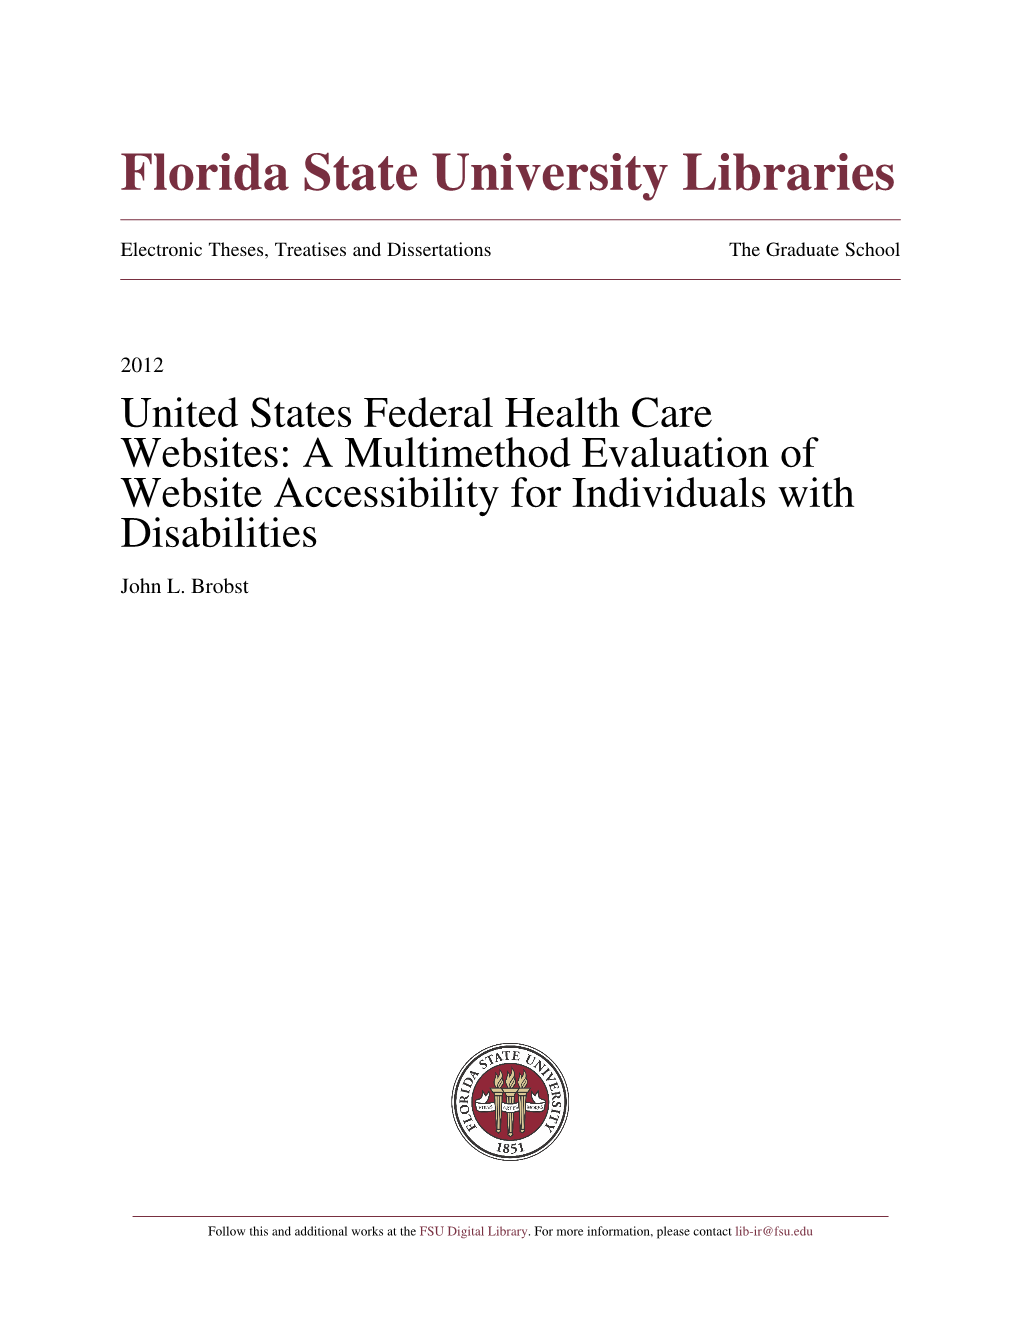 A Multimethod Evaluation of Website Accessibility for Individuals with Disabilities John L